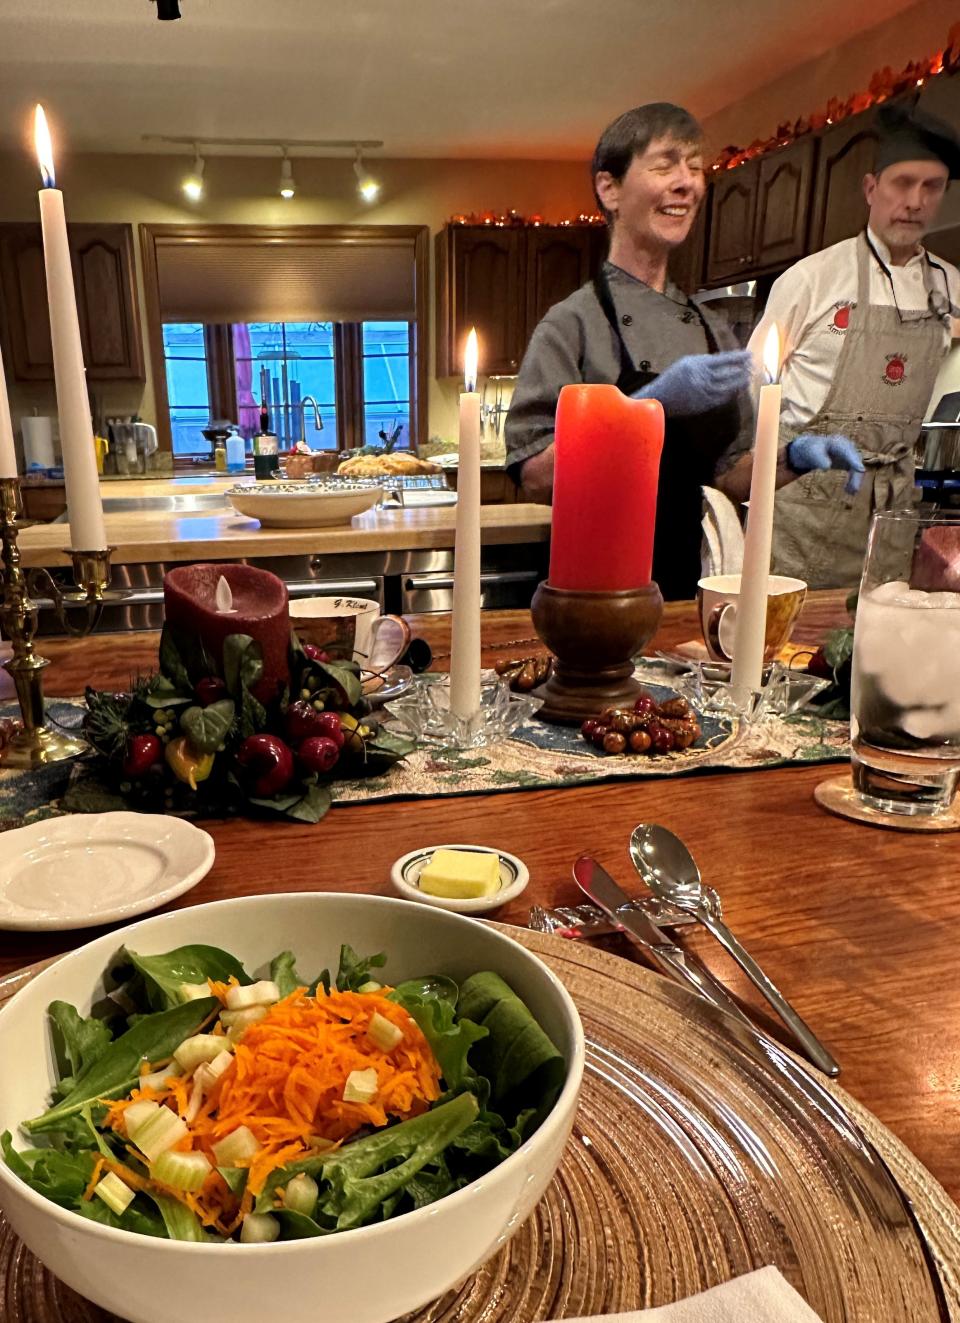 Chef Angela Marie Perkins introduces the dinner menu to guests at a recent specialty event served in the chef's kitchen of Poggio Amorelli Bed and Breakfast in North Canton.